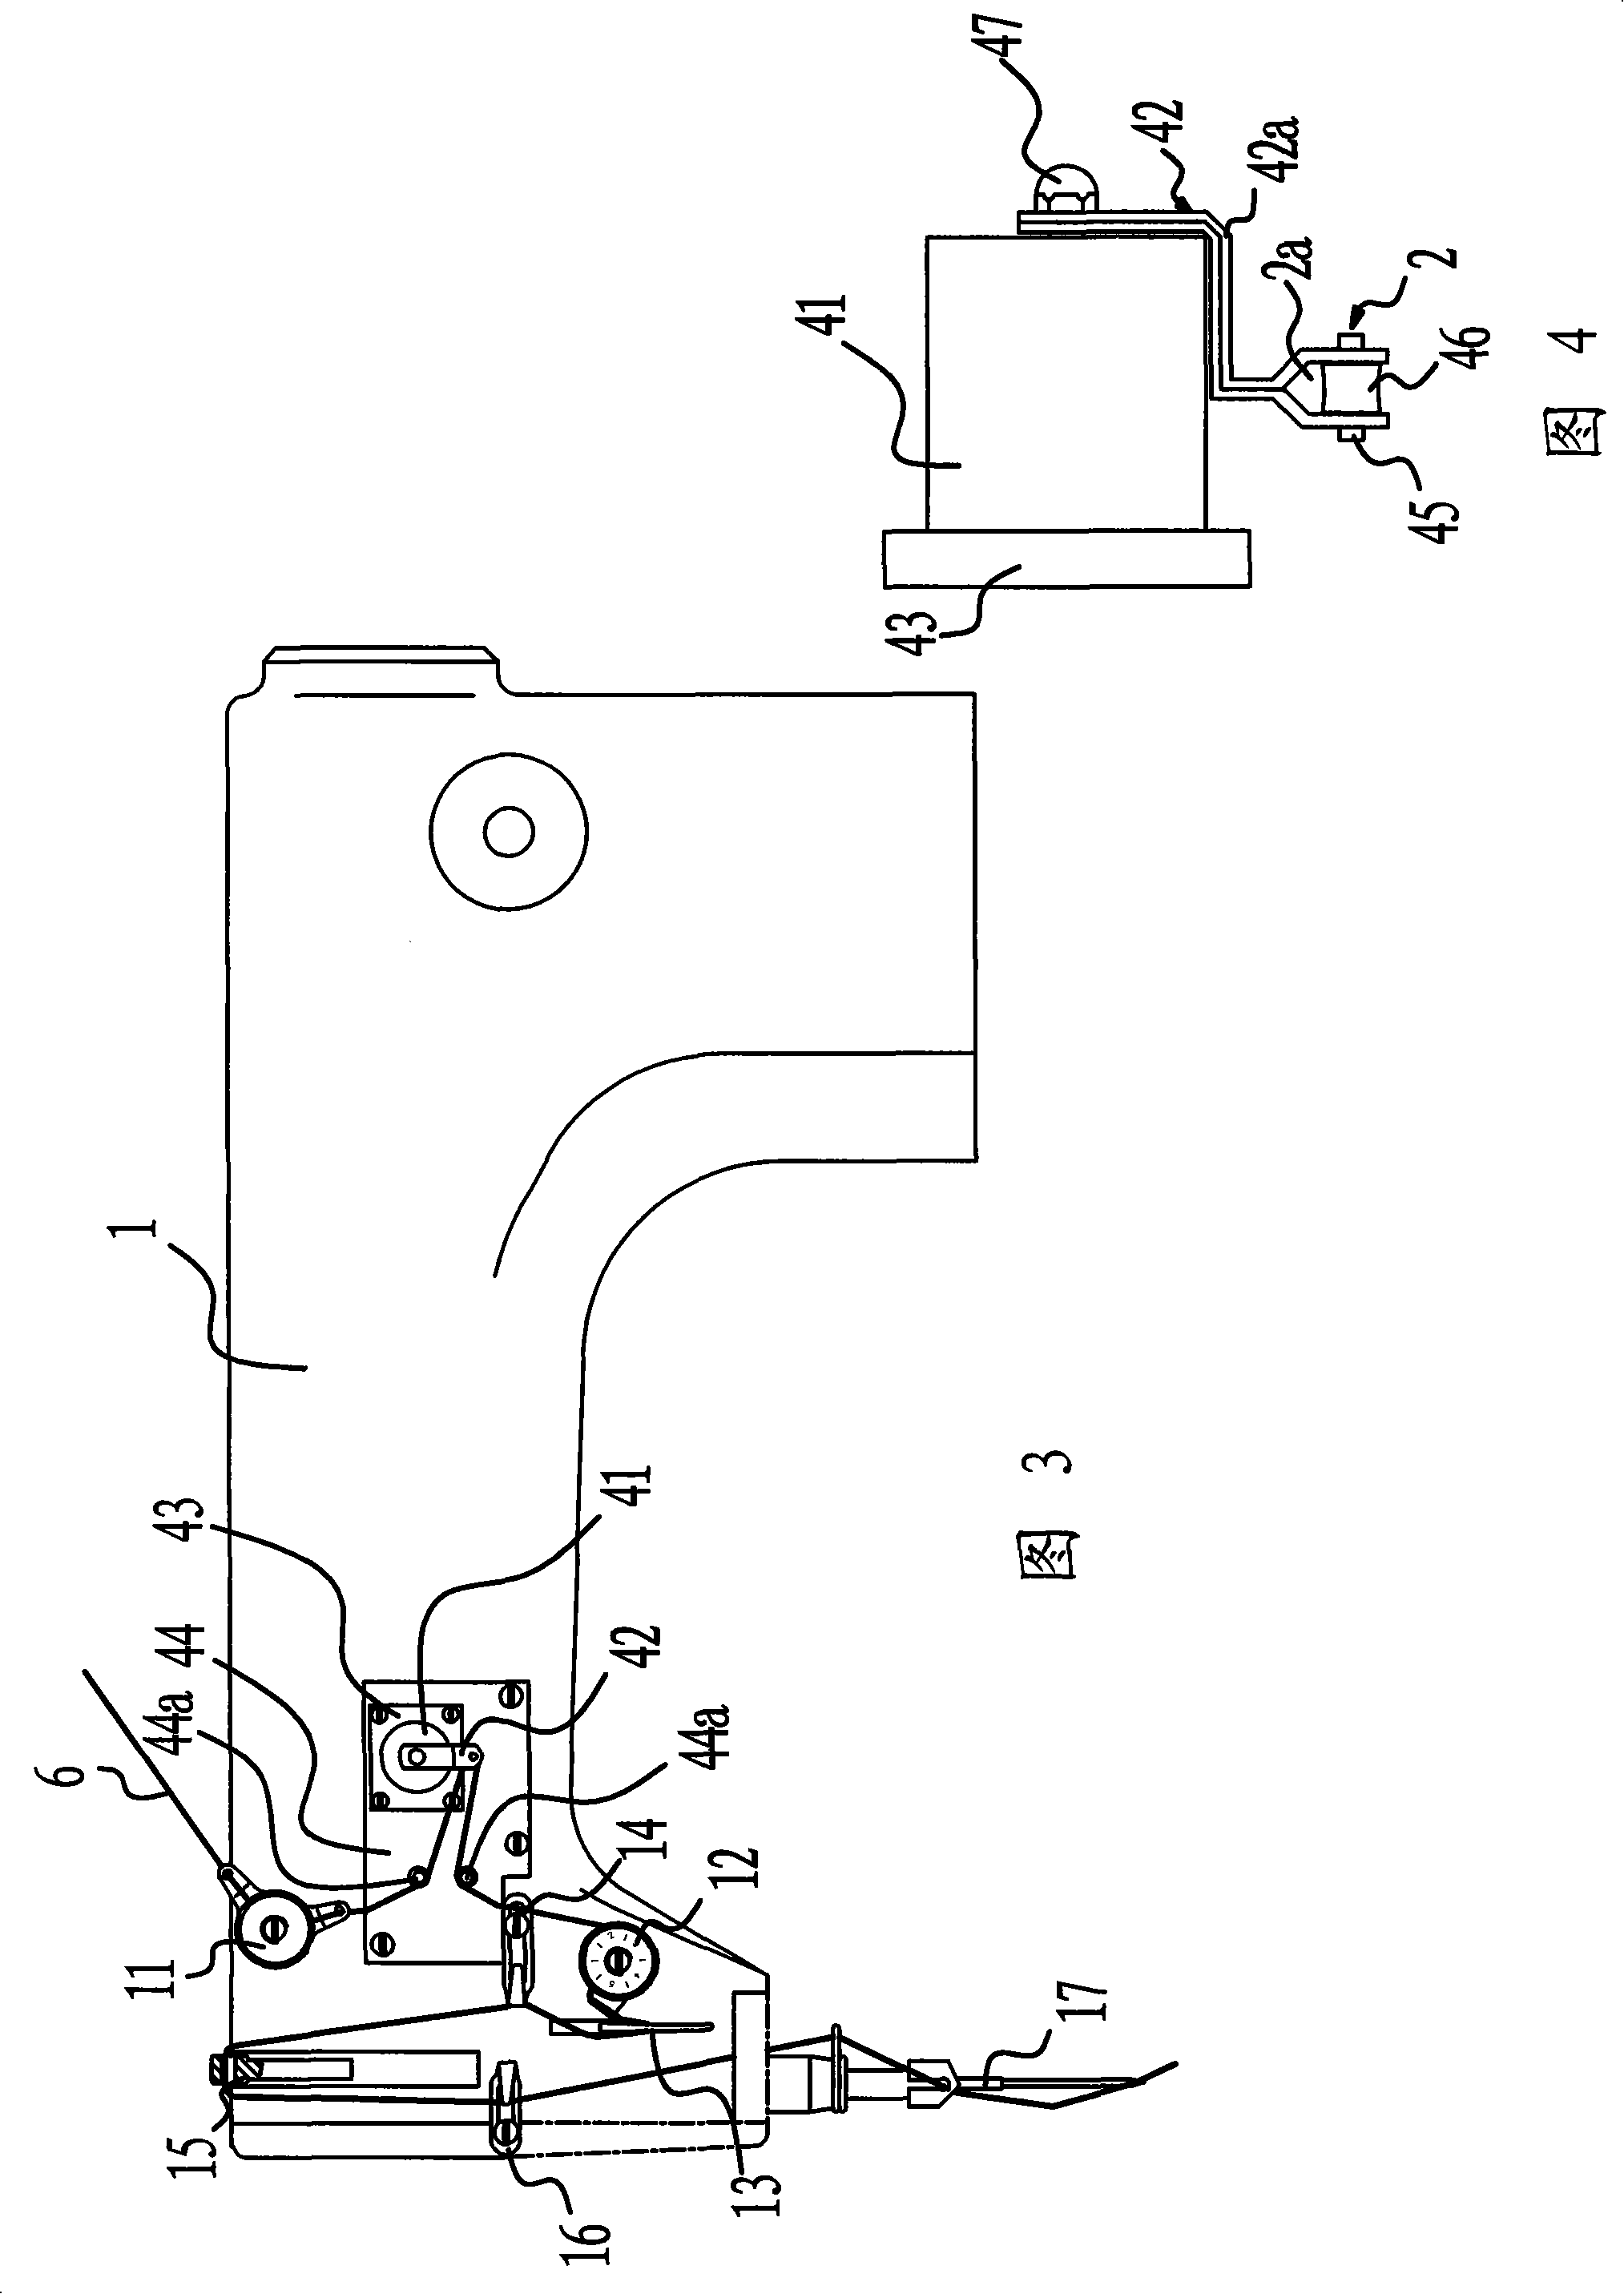 Thread drawing device of sewing machine